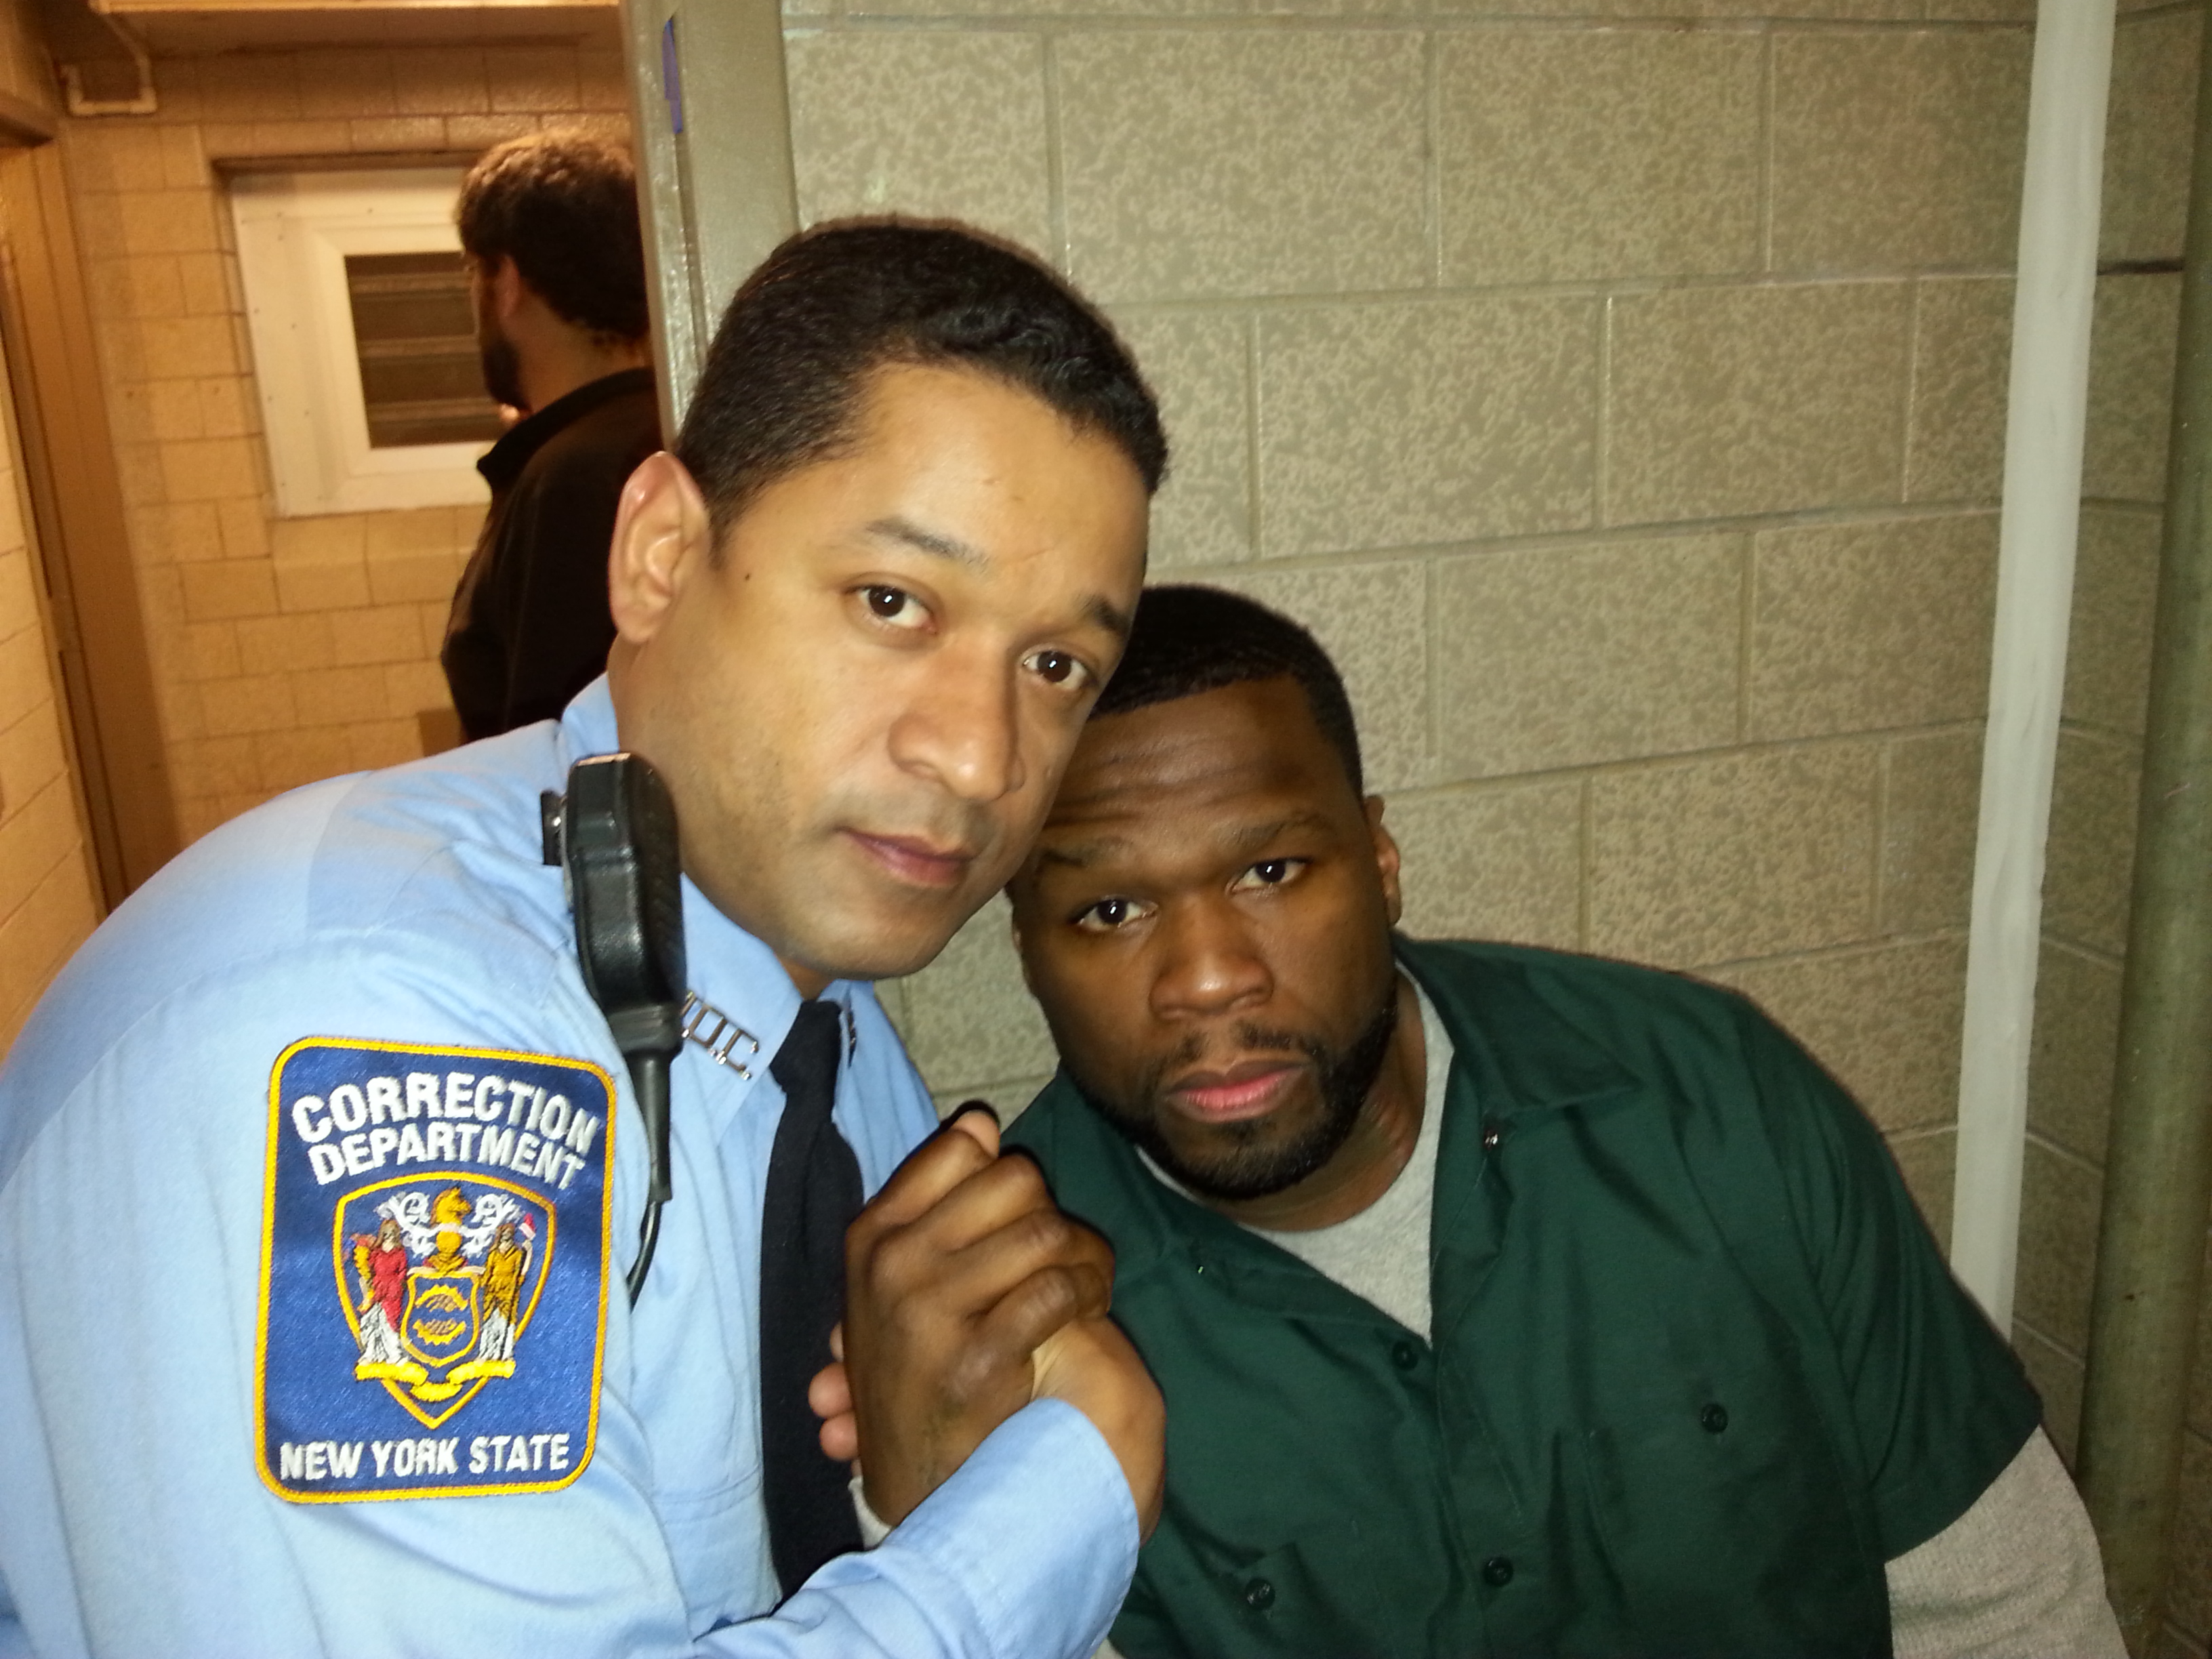 Alan R. Rodriguez and 50 Cent-AKA- Curtis Jackson on set of POWER.